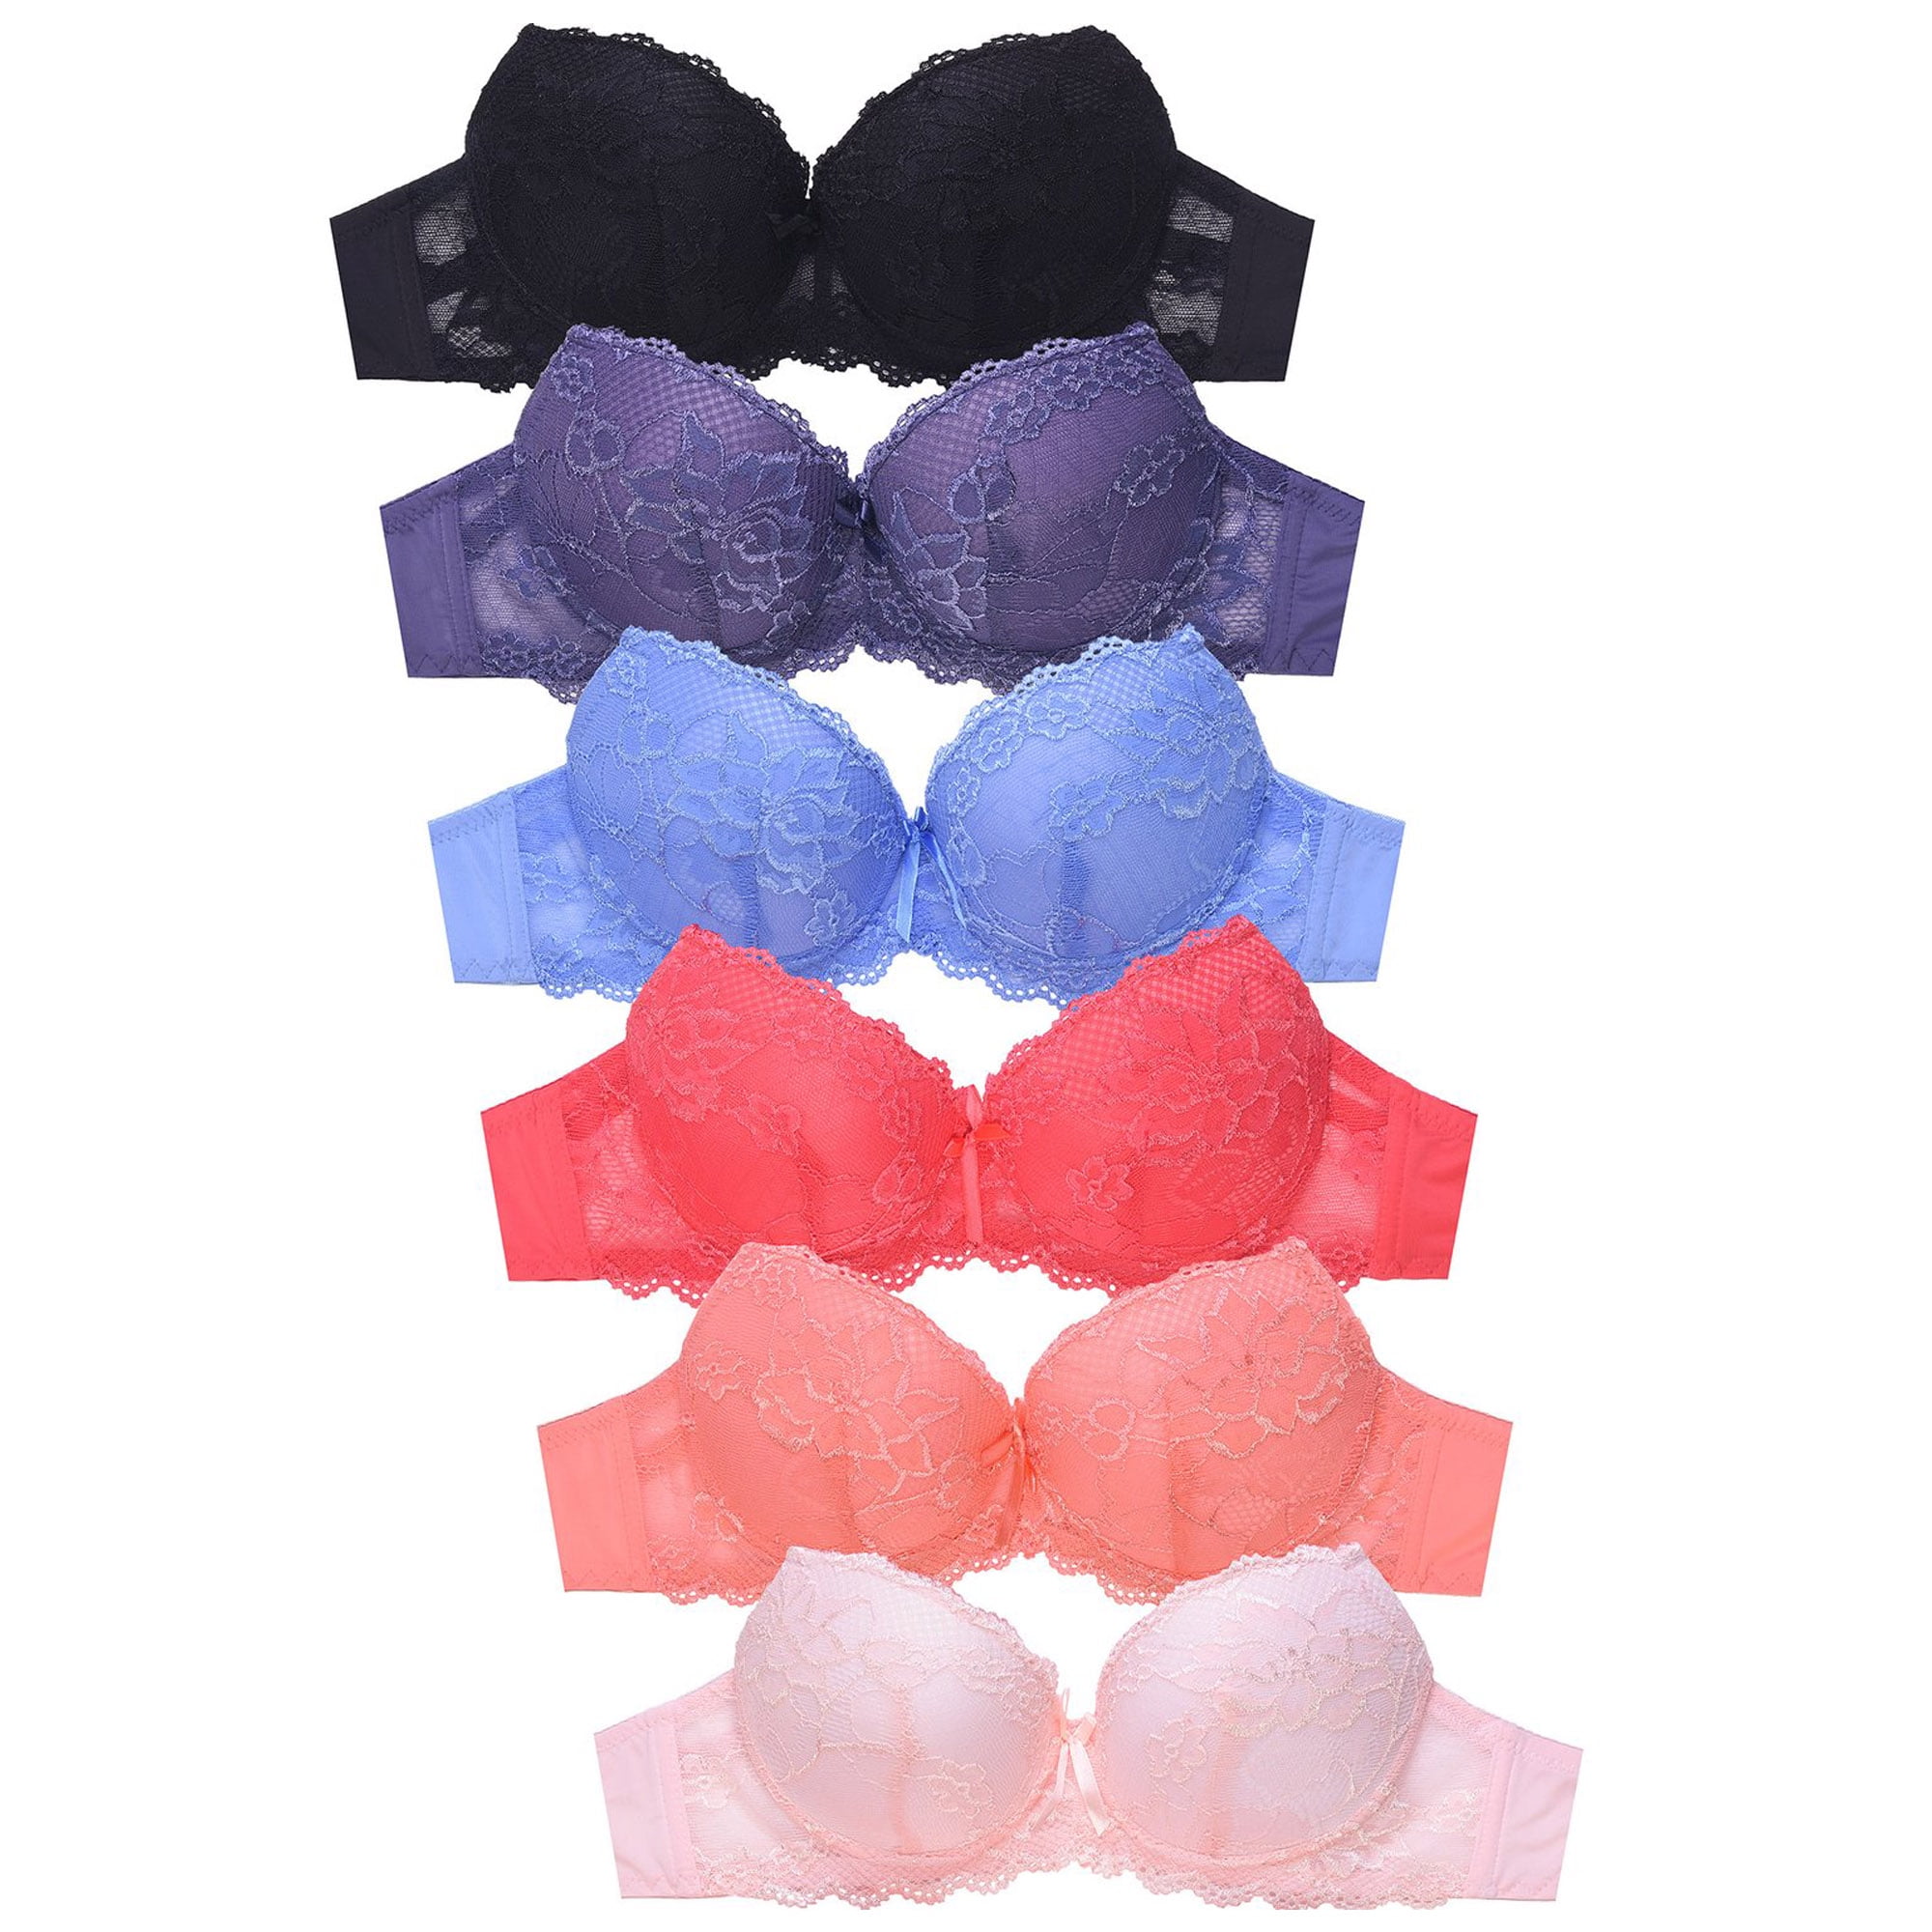 LAVRA Women's 6 Pack of Full Cup Push Up Bras Floral Lace Plain Design 